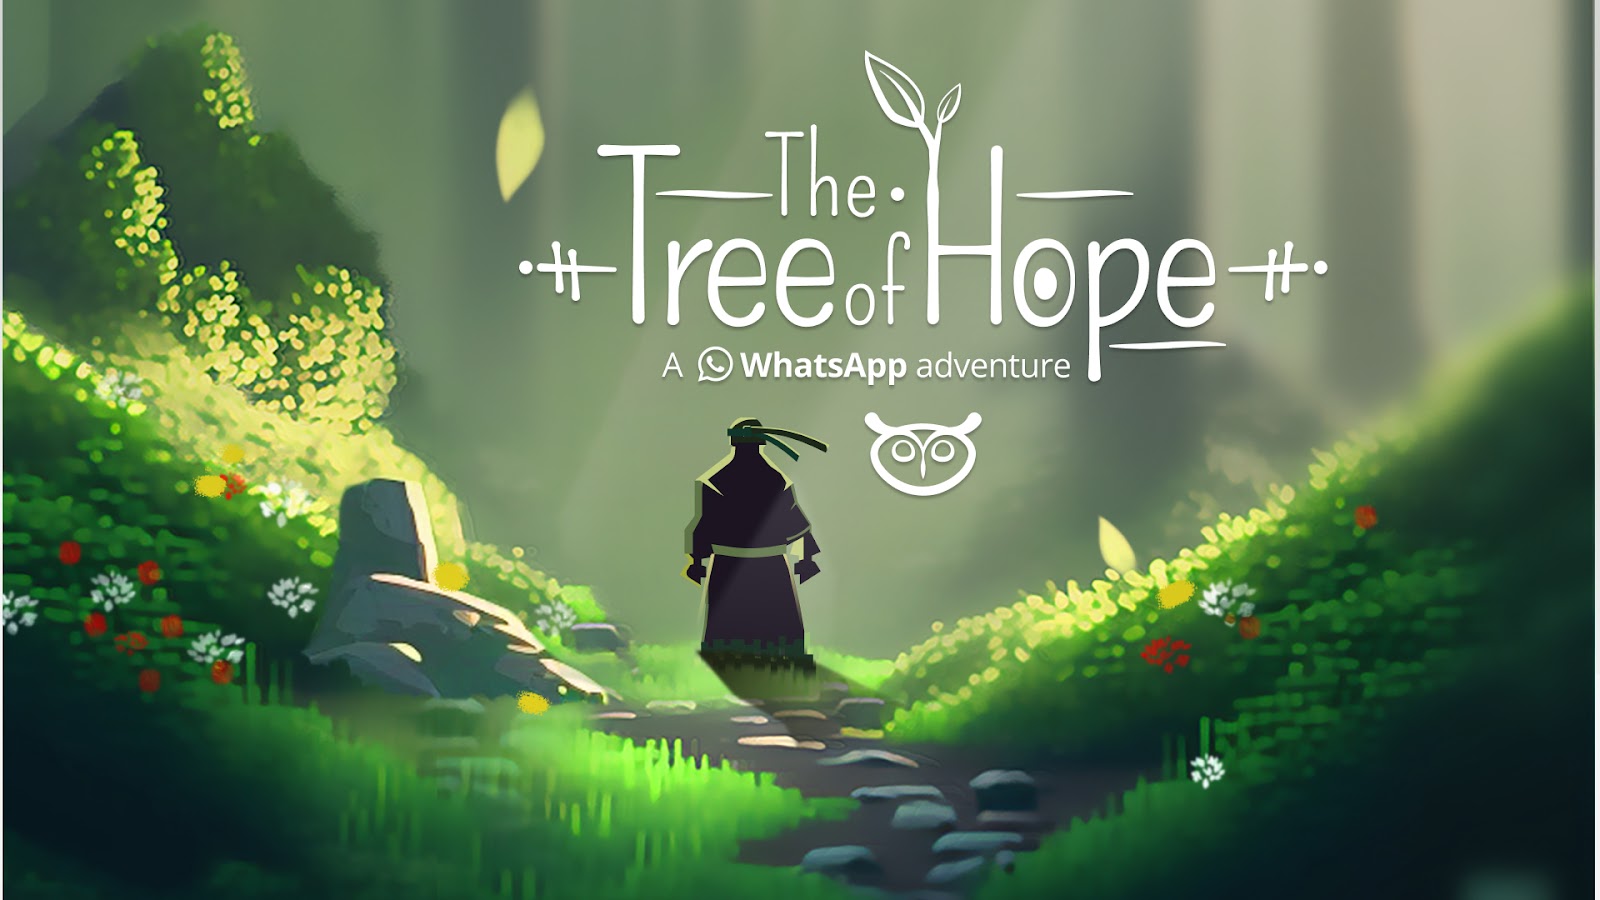 Tree of Hope WhatsApp game by charles. Image of EcoNinja standing in a forest